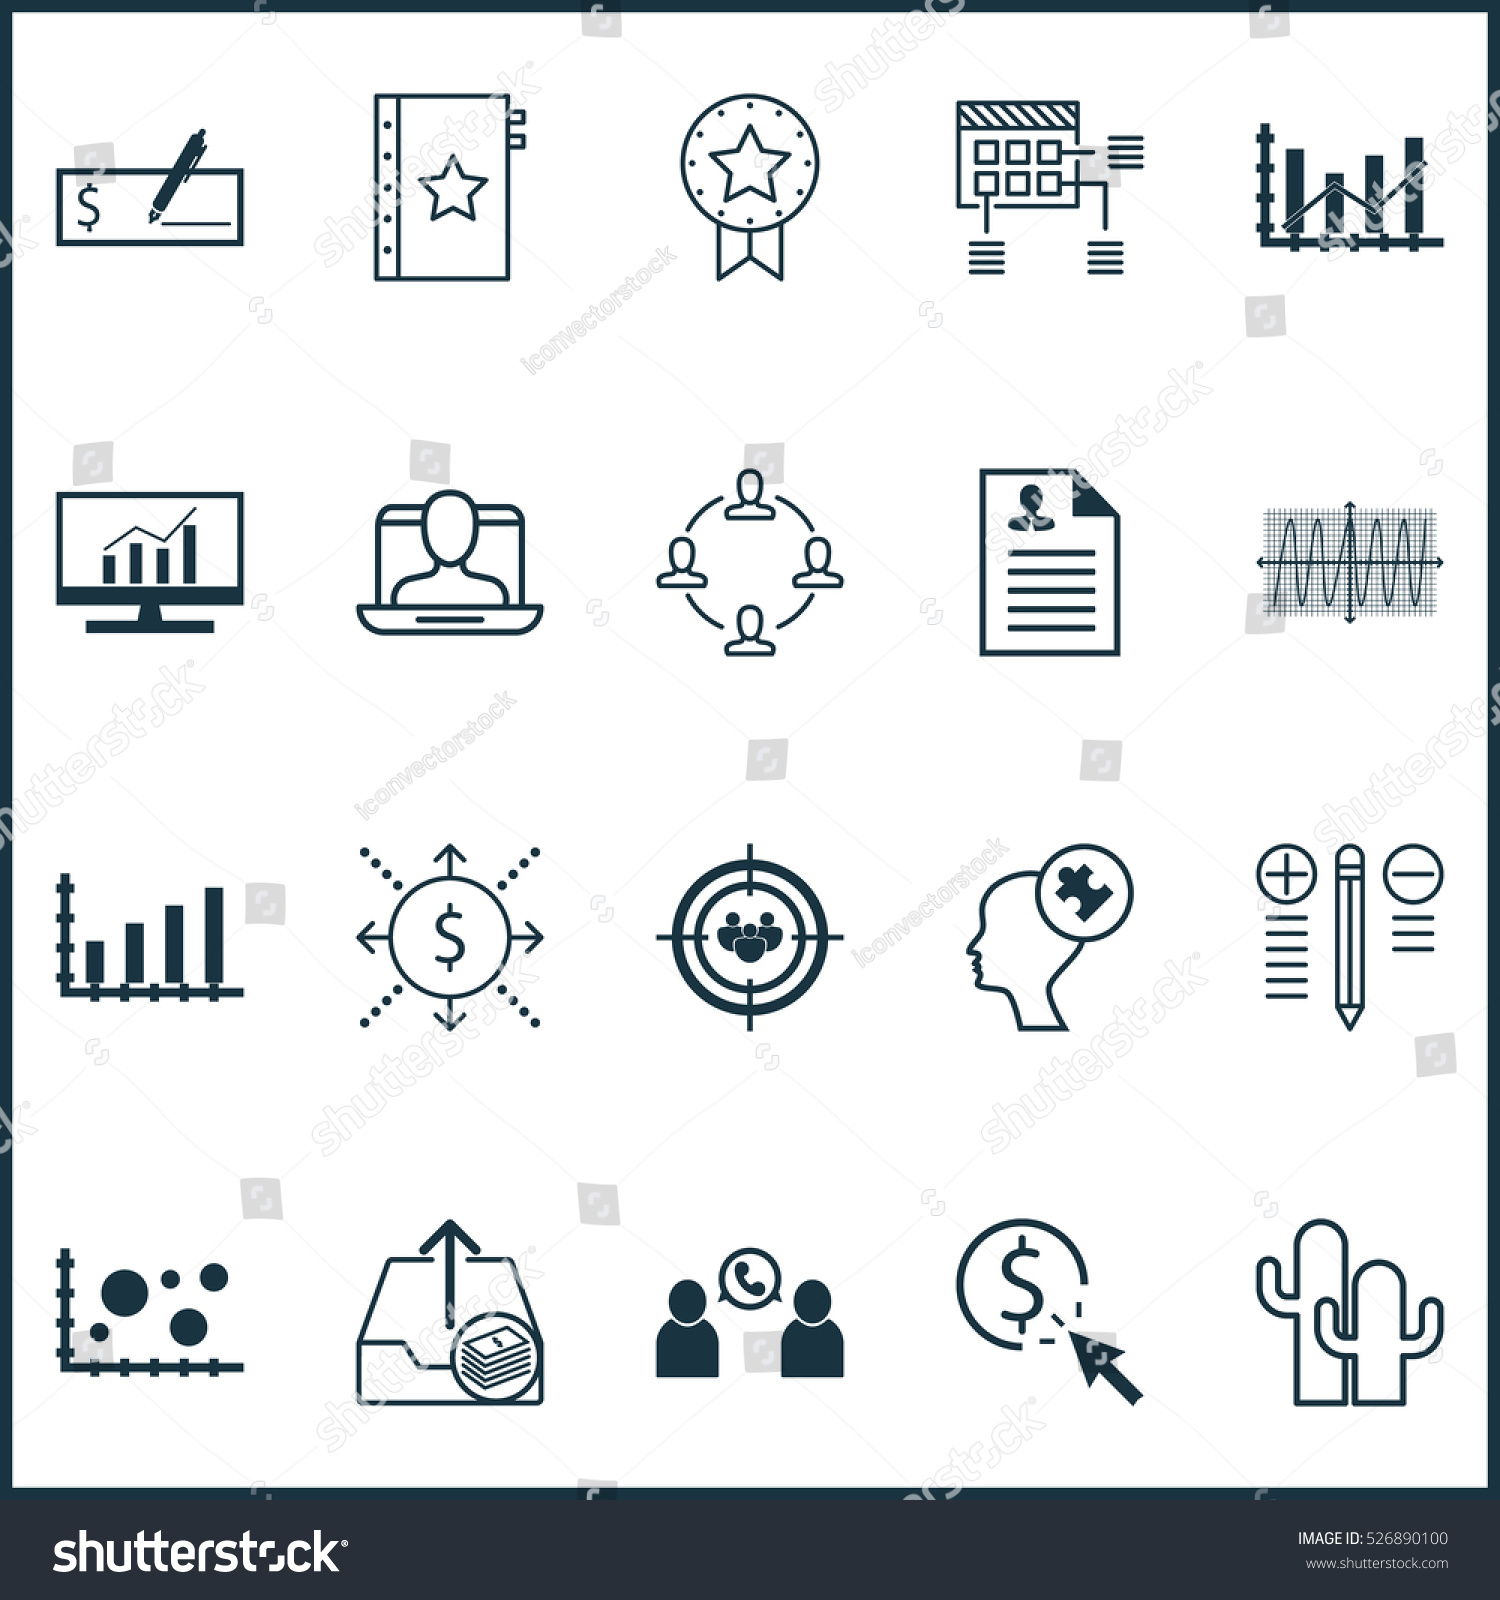 Set Of 20 Universal Editable Icons. Can Be Used For Web, Mobile And App Design. Includes Elements Such As Paid Upload, PPC, Present Badge And More. #526890100